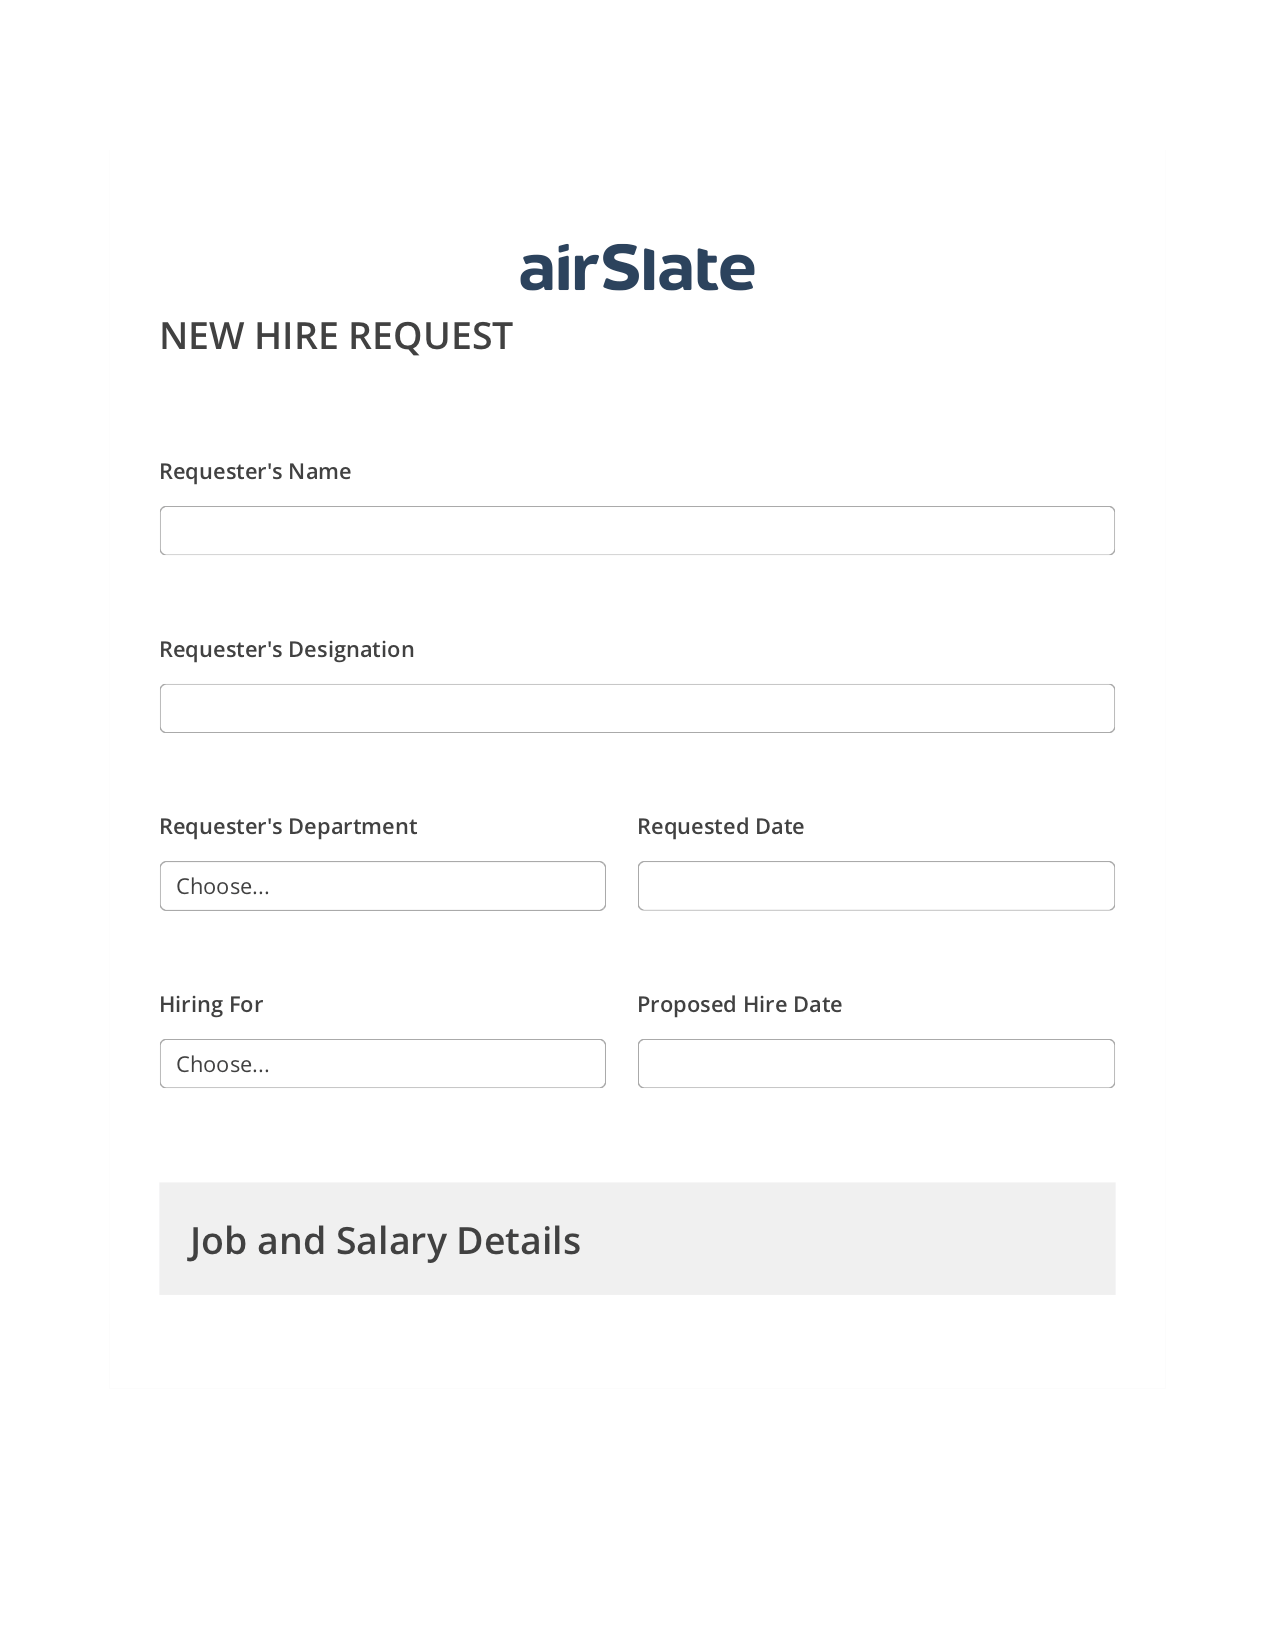 Multirole Hiring Request Workflow Pre-fill Dropdowns from Excel Bot, Reminder Bot, Post-finish Document Bot